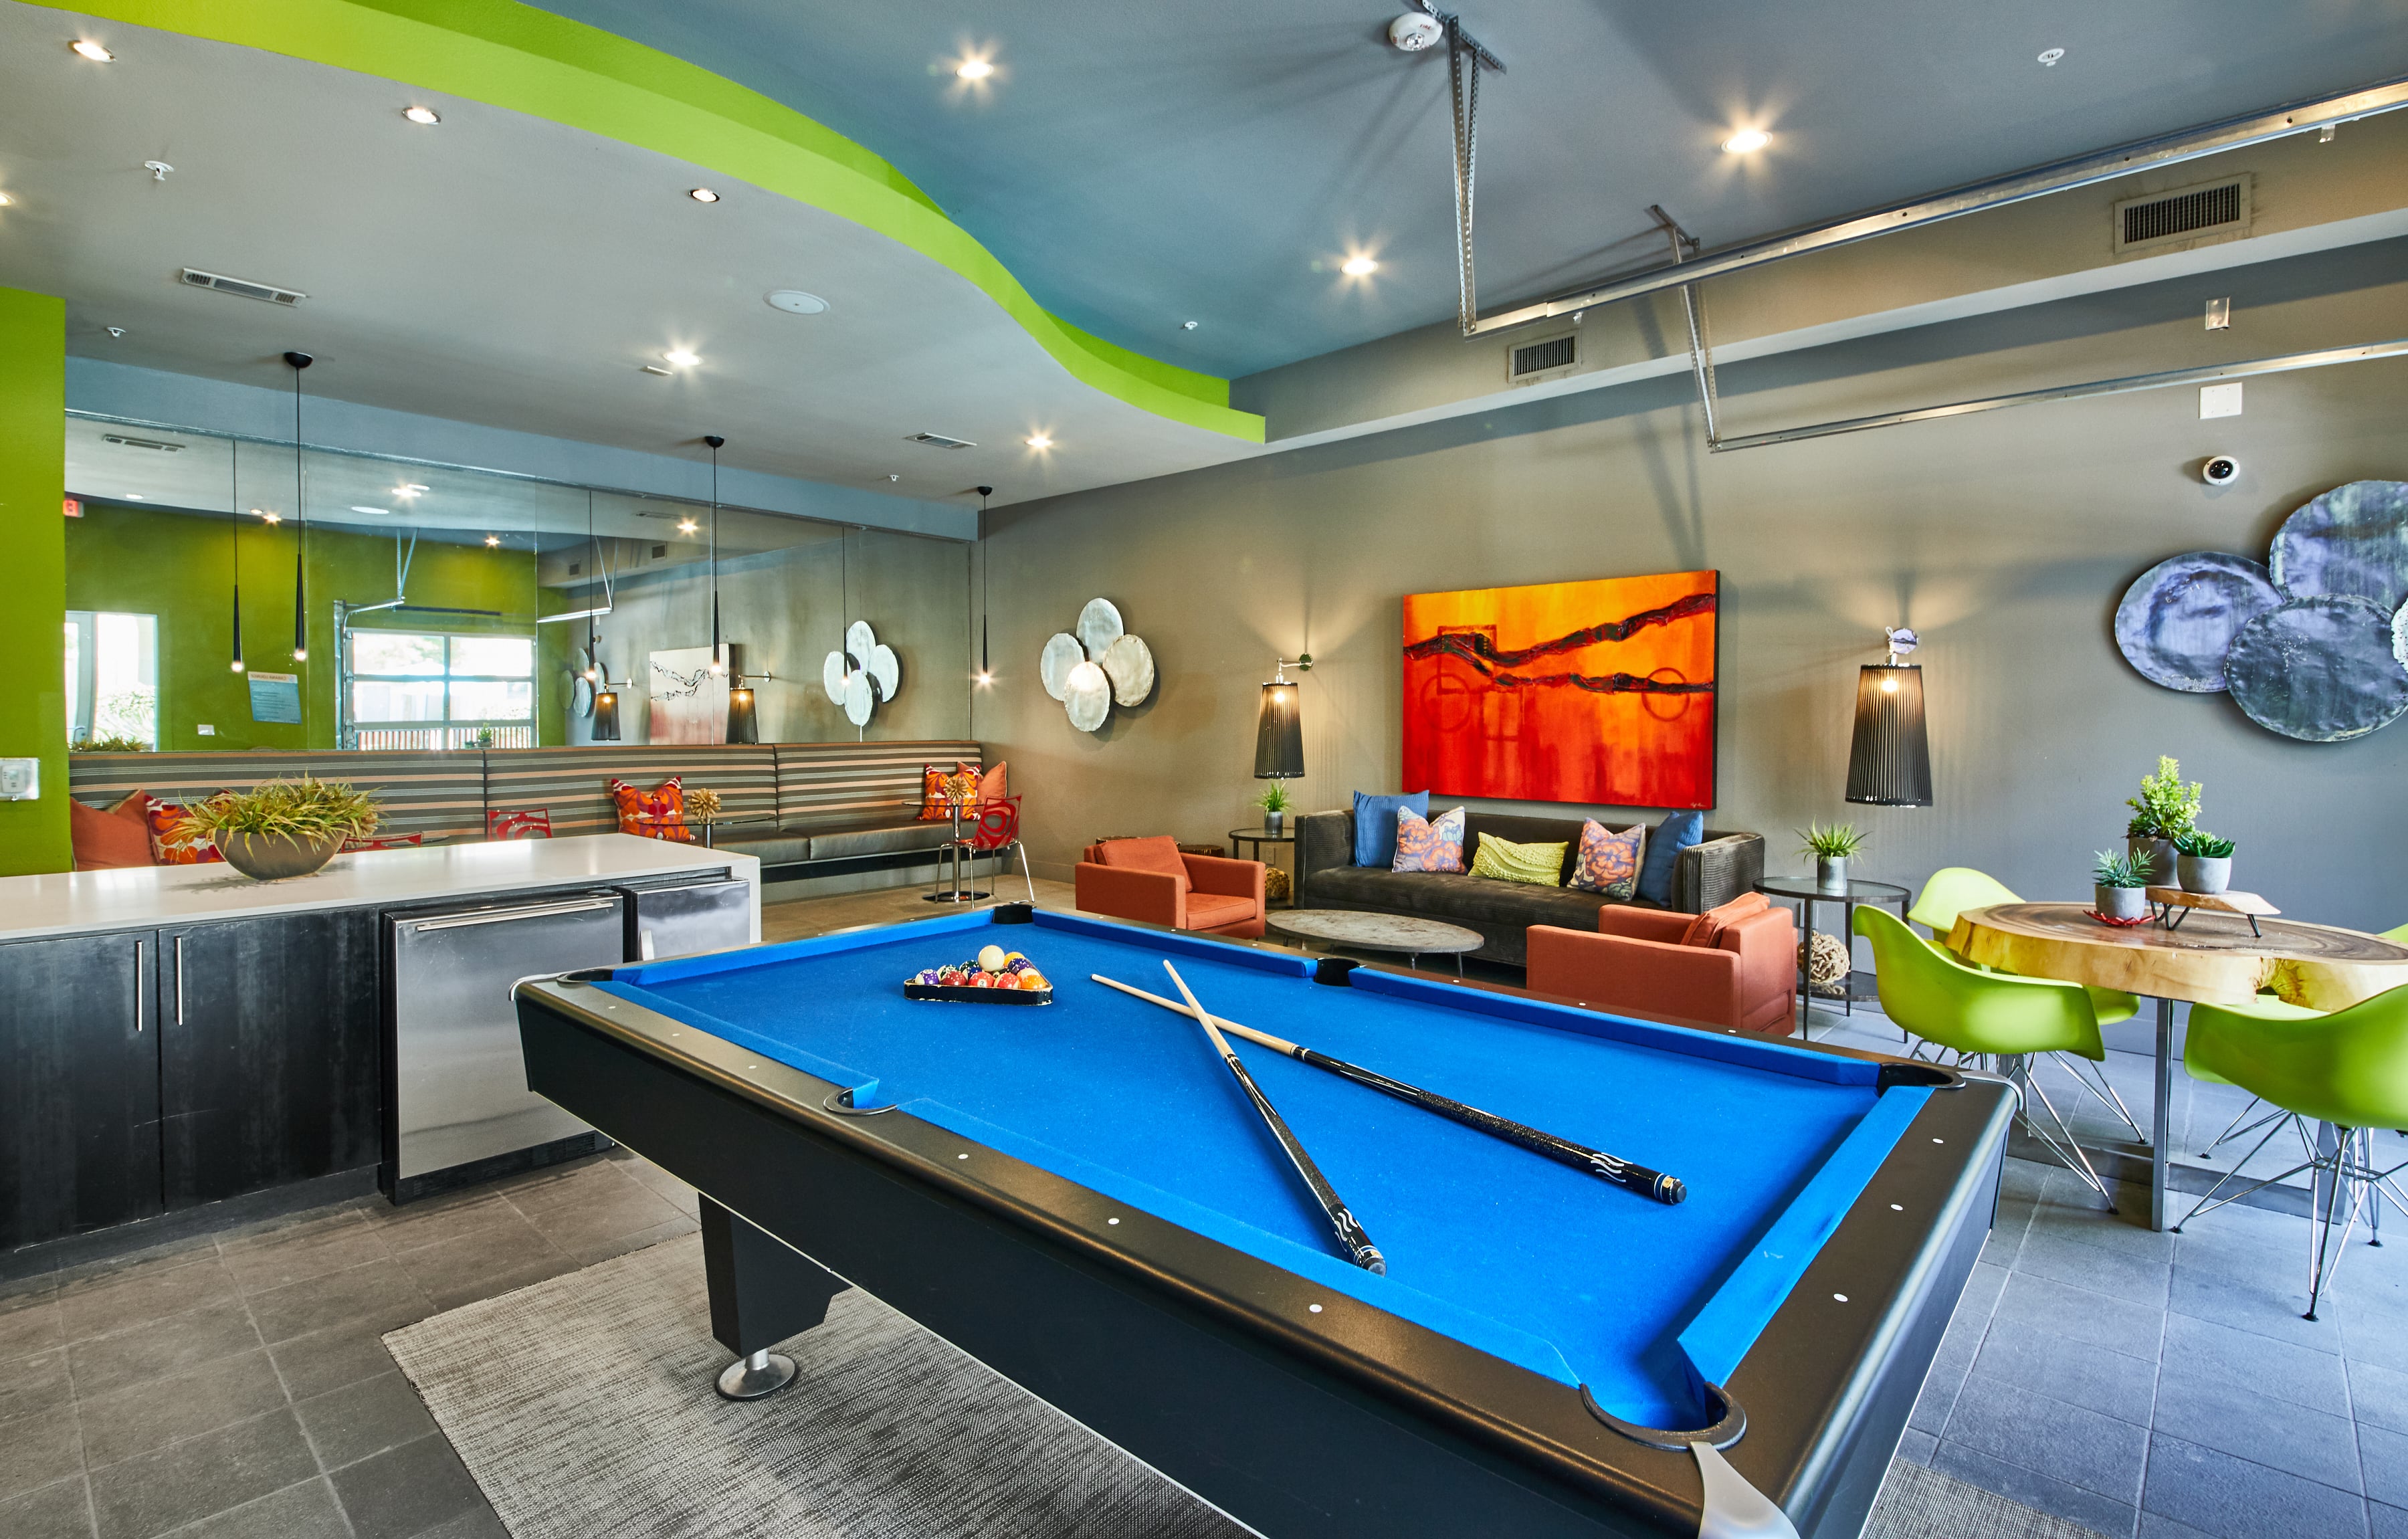 Billiards area inside the resident clubhouse at the Standard at Cityline